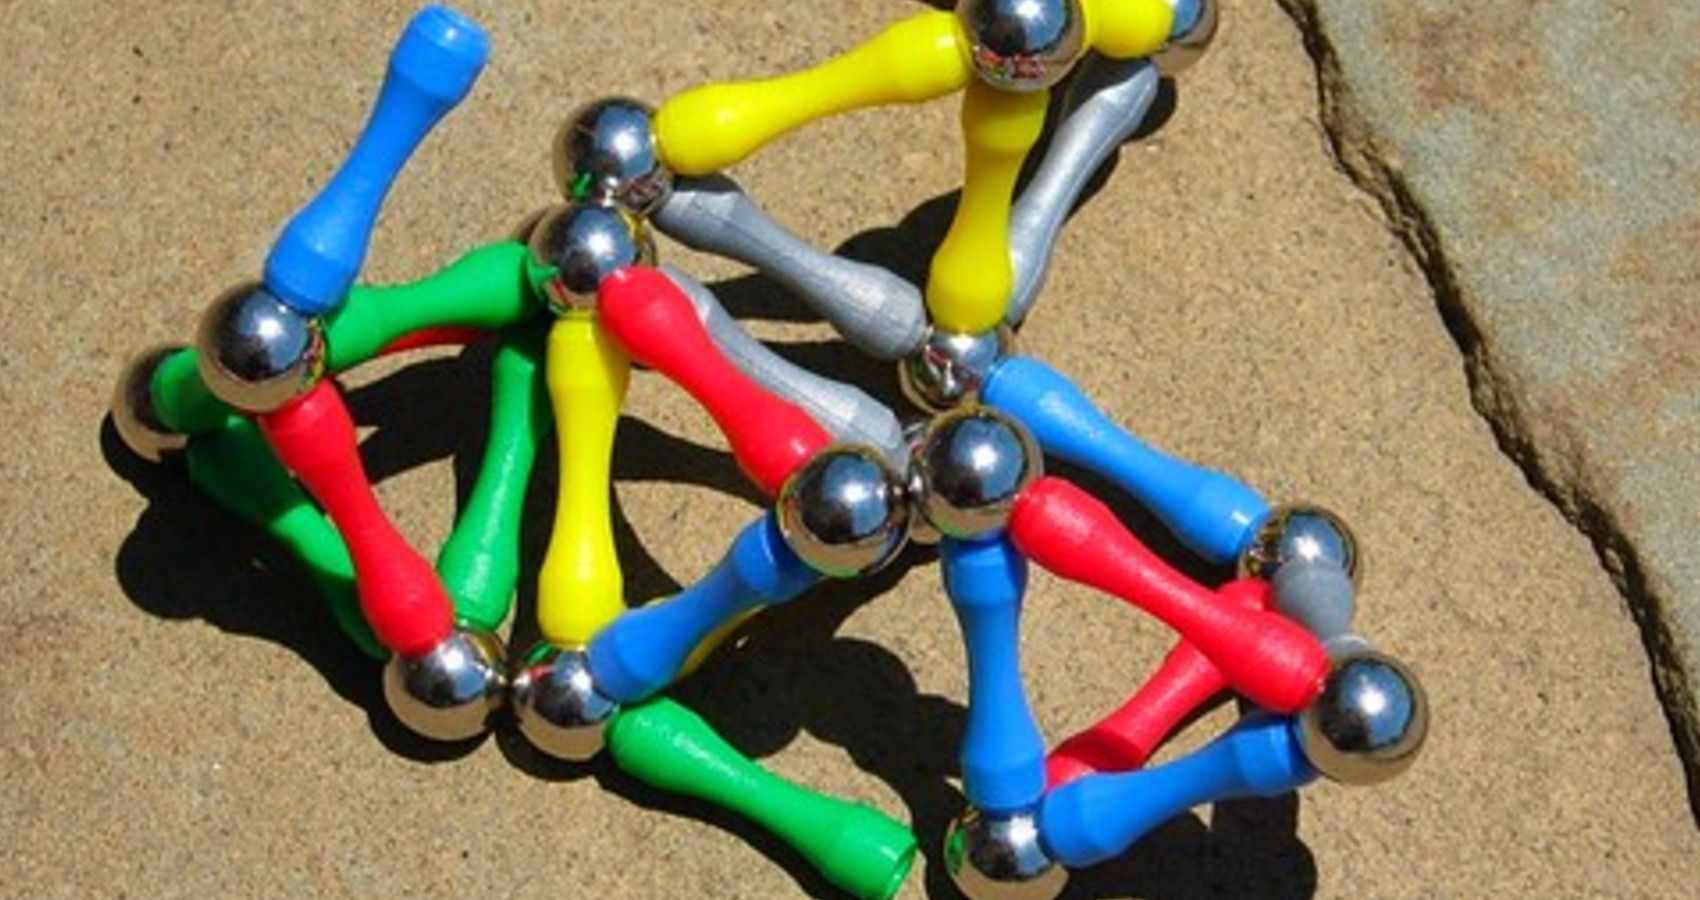 A colorful magnetic toy for children